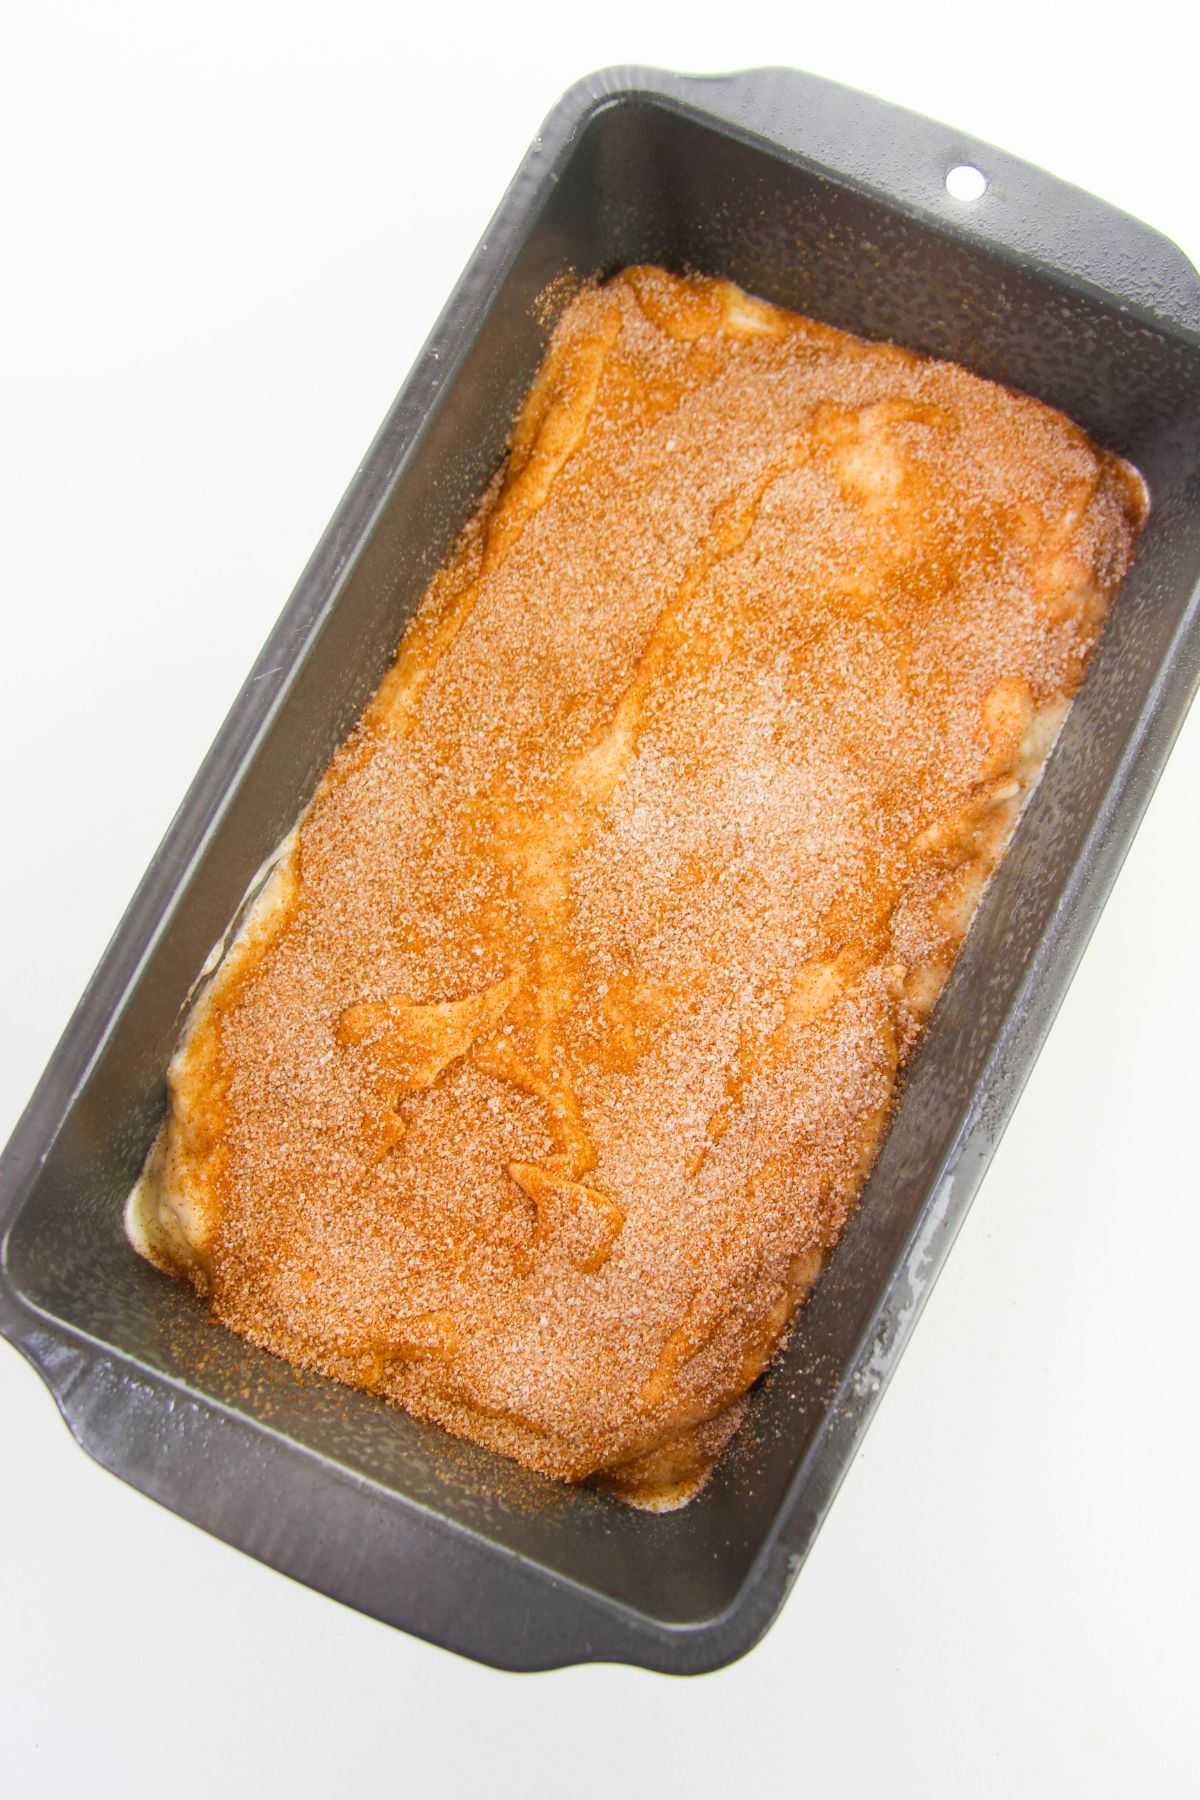 Loaf pan filled with banana batter and sprinkled with cinnamon and sugar.